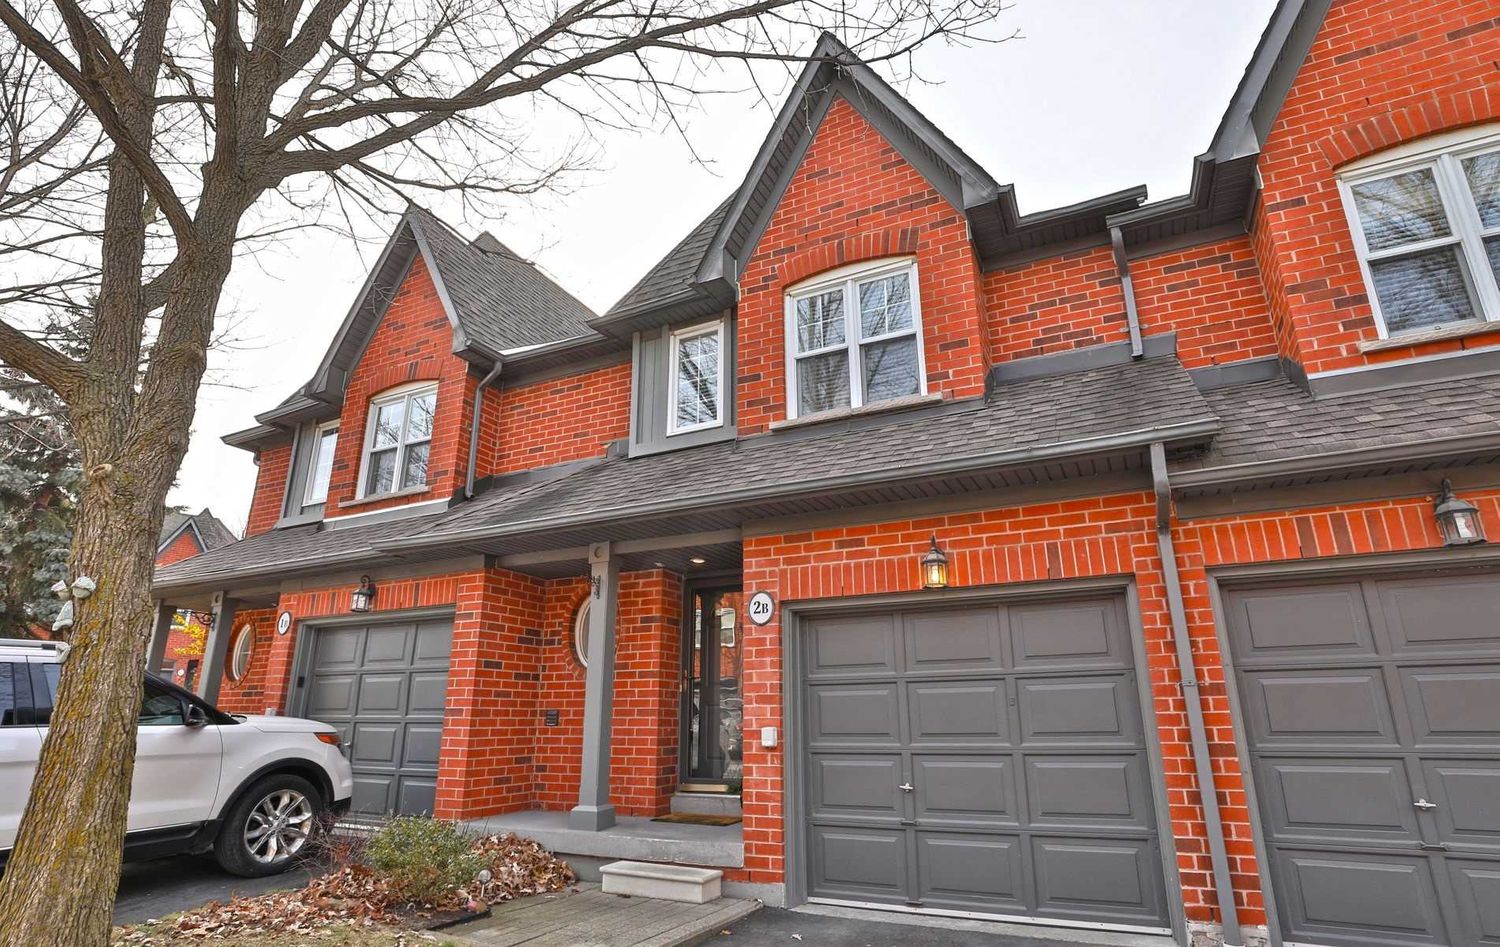 1084 Queen Street W. 1084 Queen Street West Townhomes is located in  Mississauga, Toronto - image #2 of 2